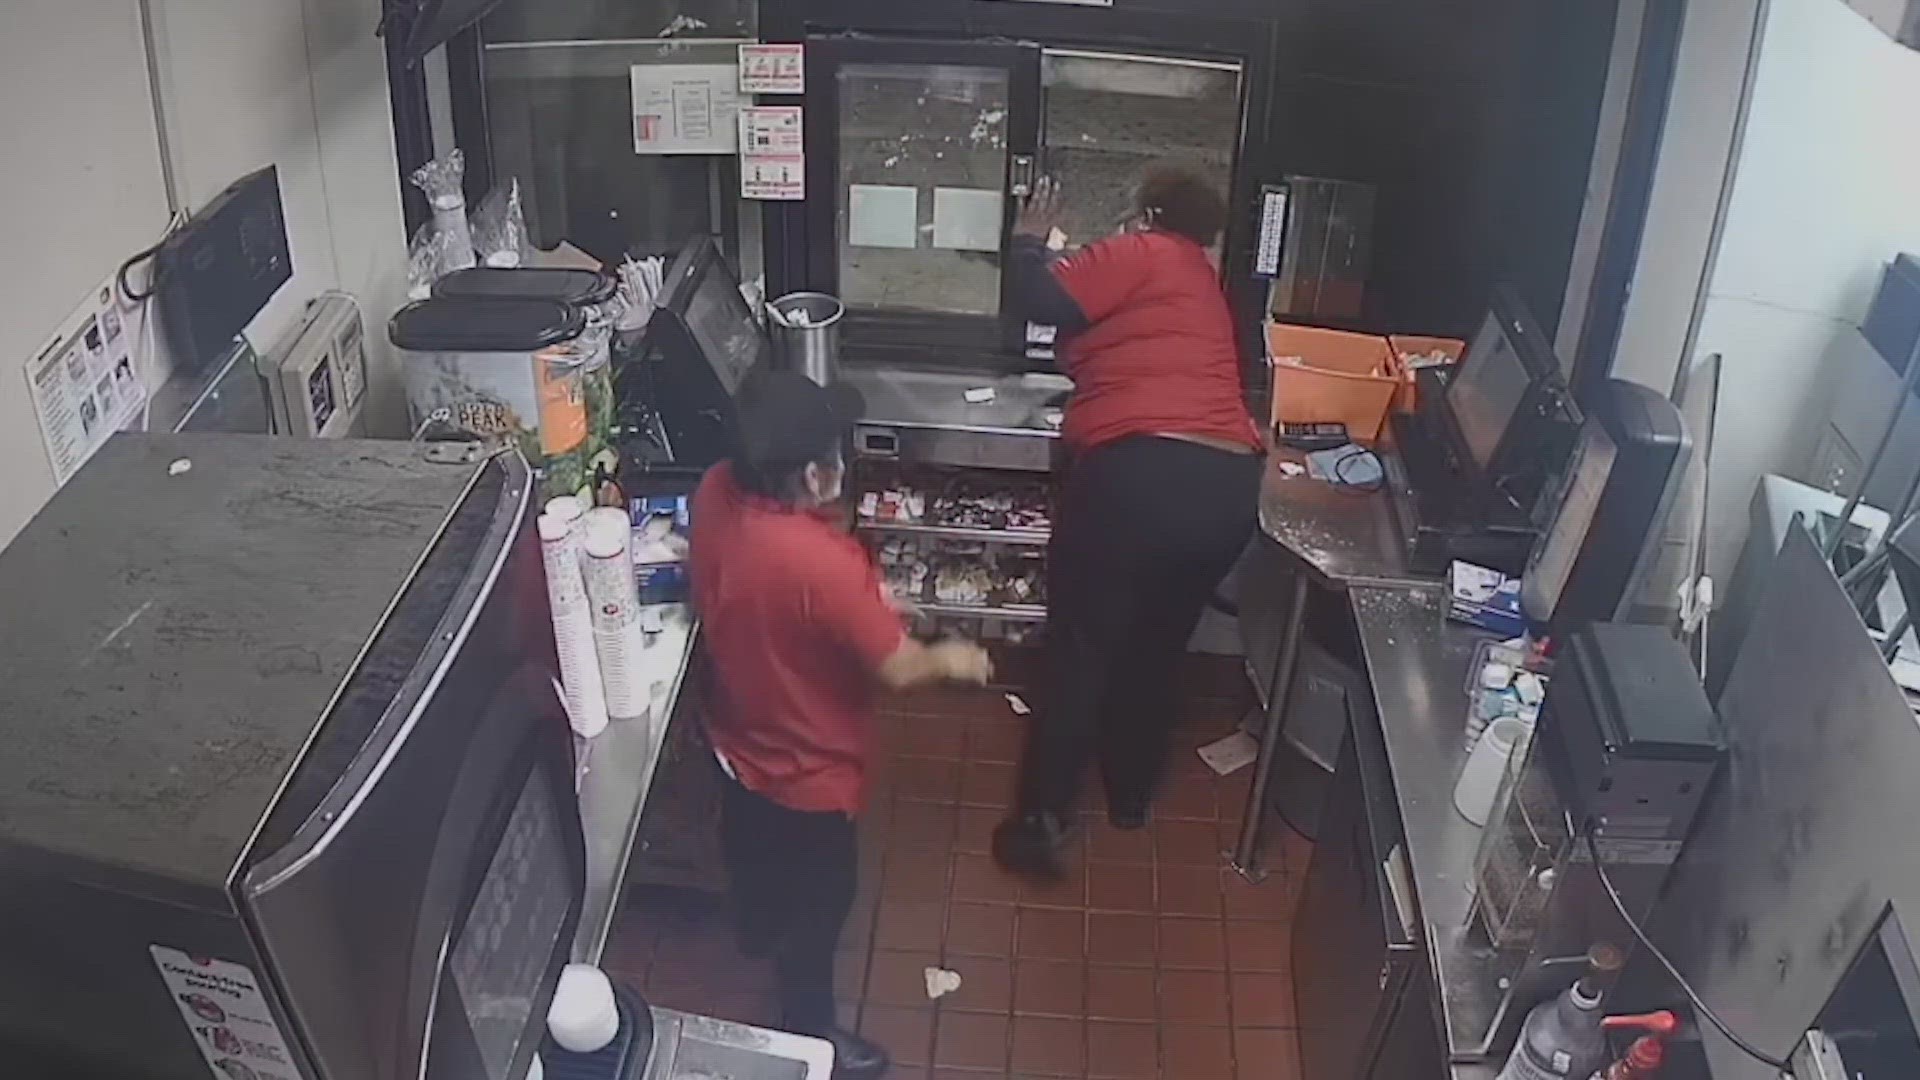 The employee who was caught on camera firing a gun at the family was charged two years ago, but we're just now seeing the video thanks to a pending lawsuit.